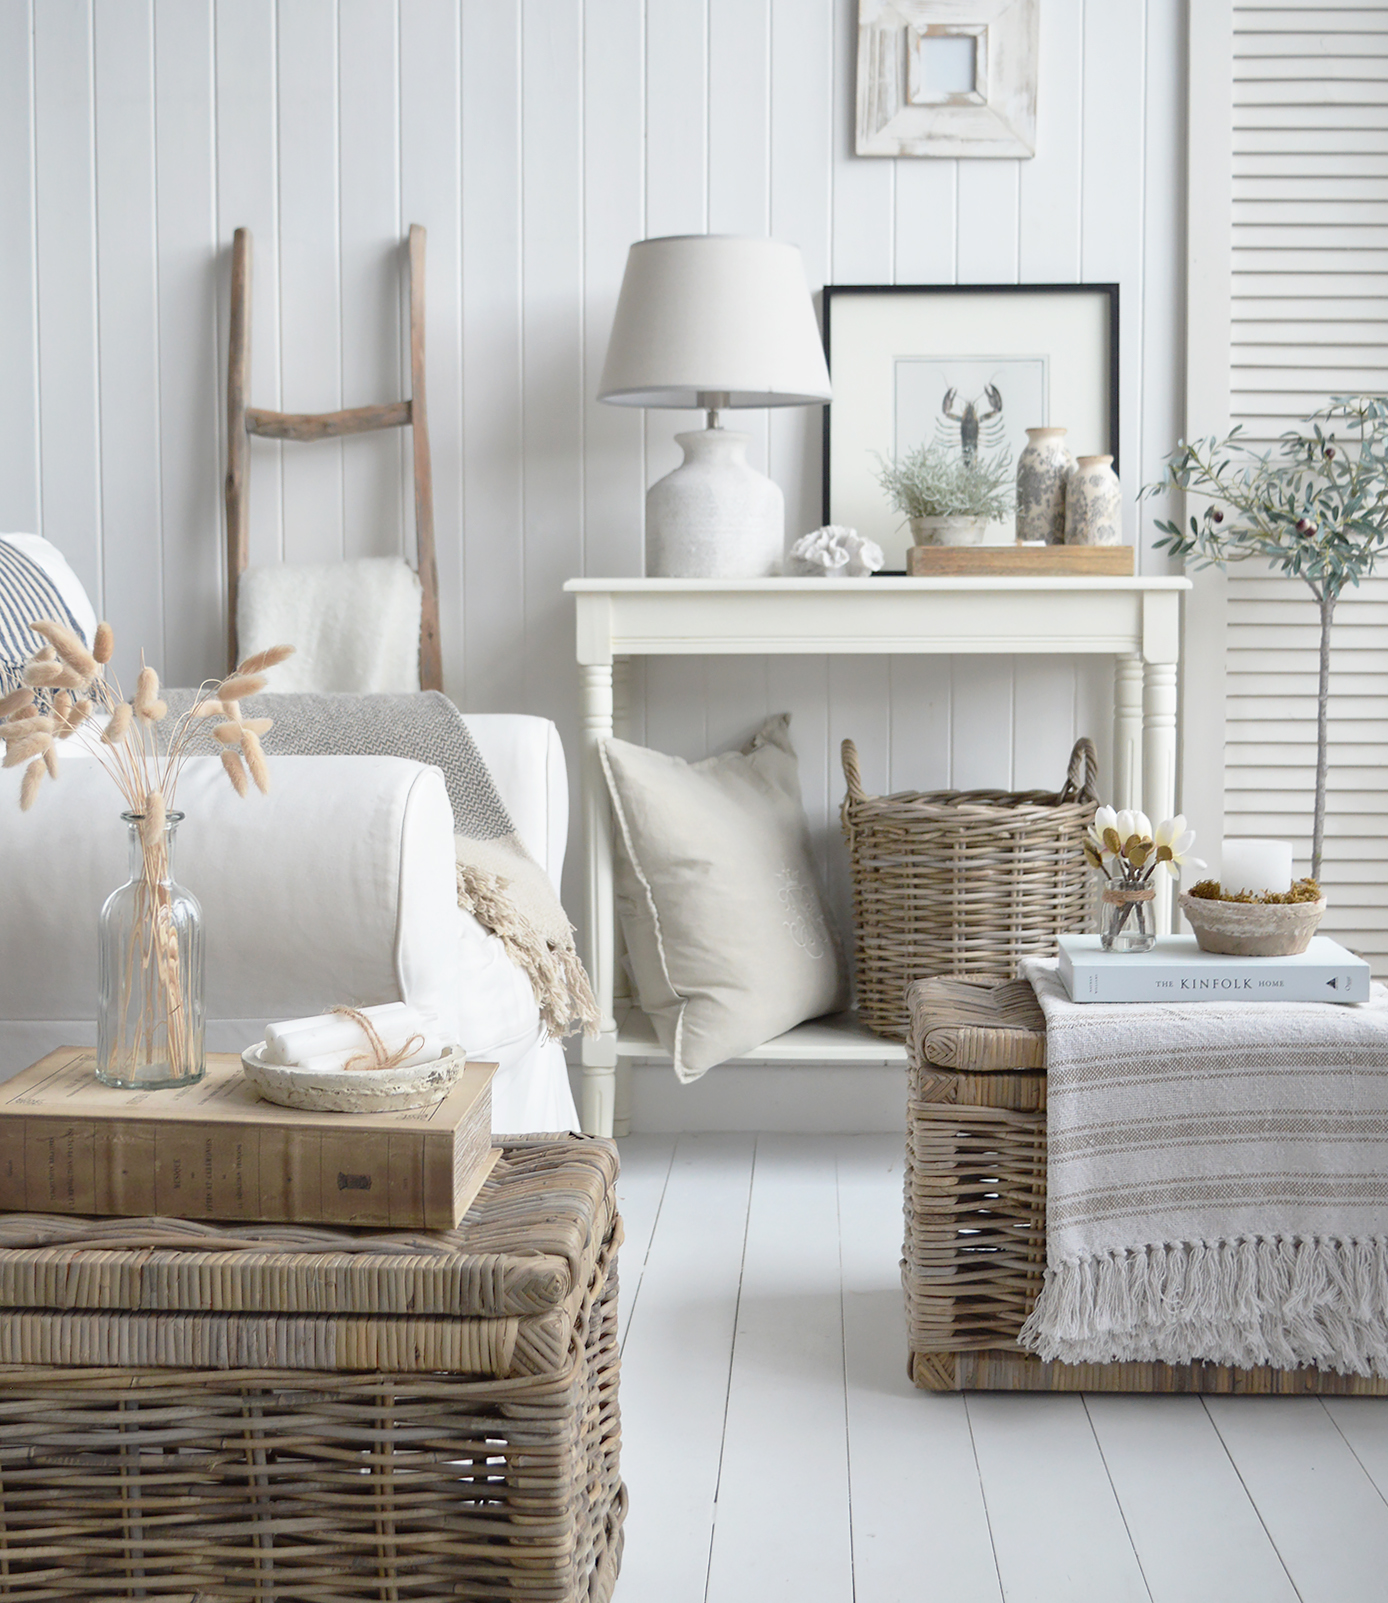 A coastally inspired living room with plenty of texture in baskets and white furniture